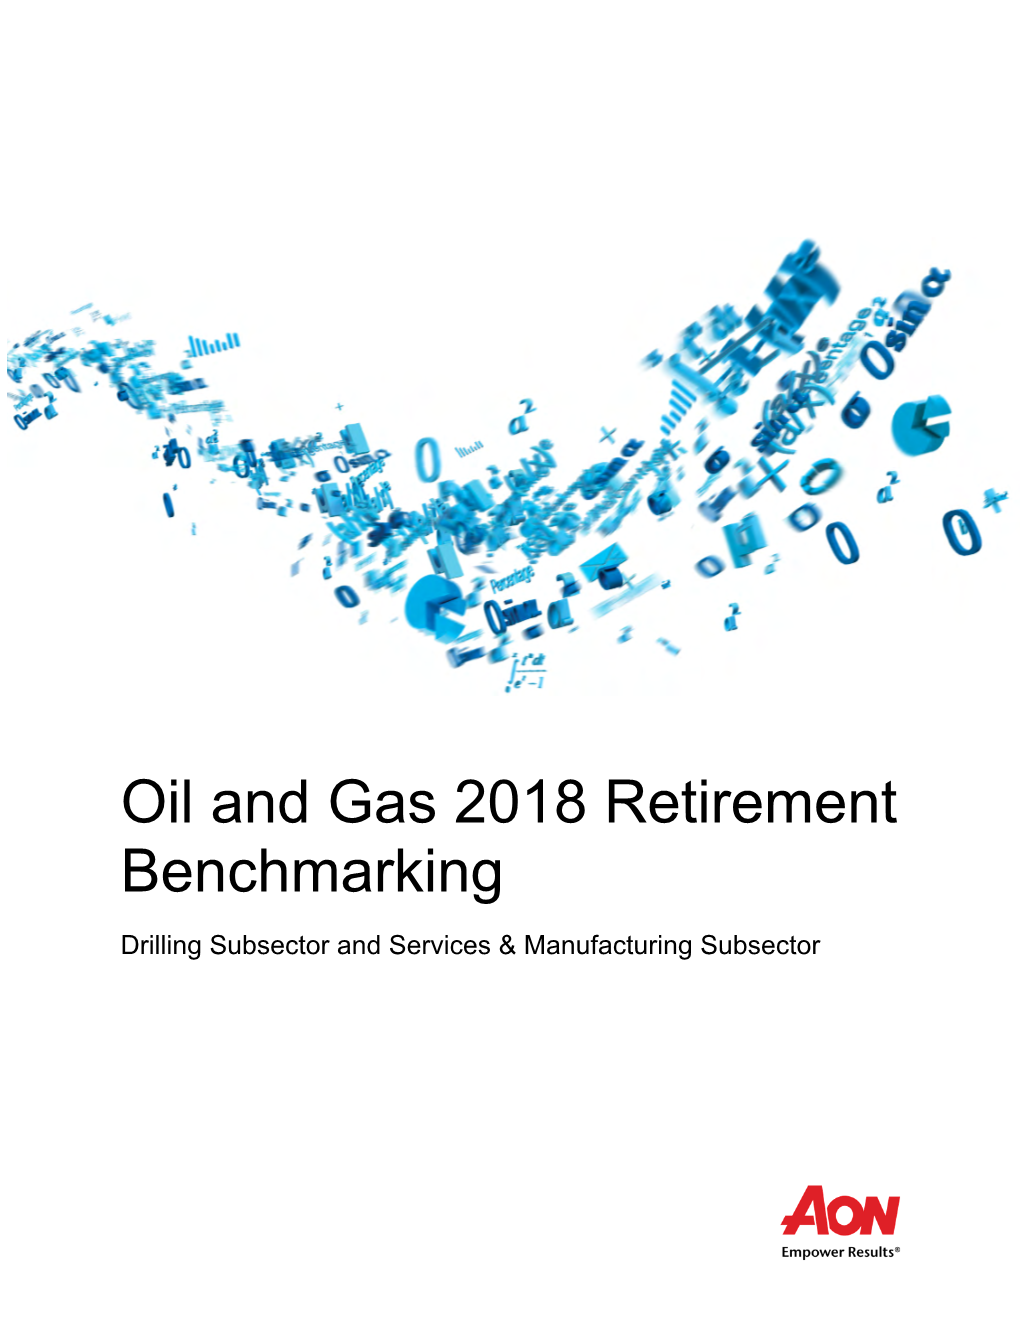 Oil and Gas 2018 Retirement Benchmarking